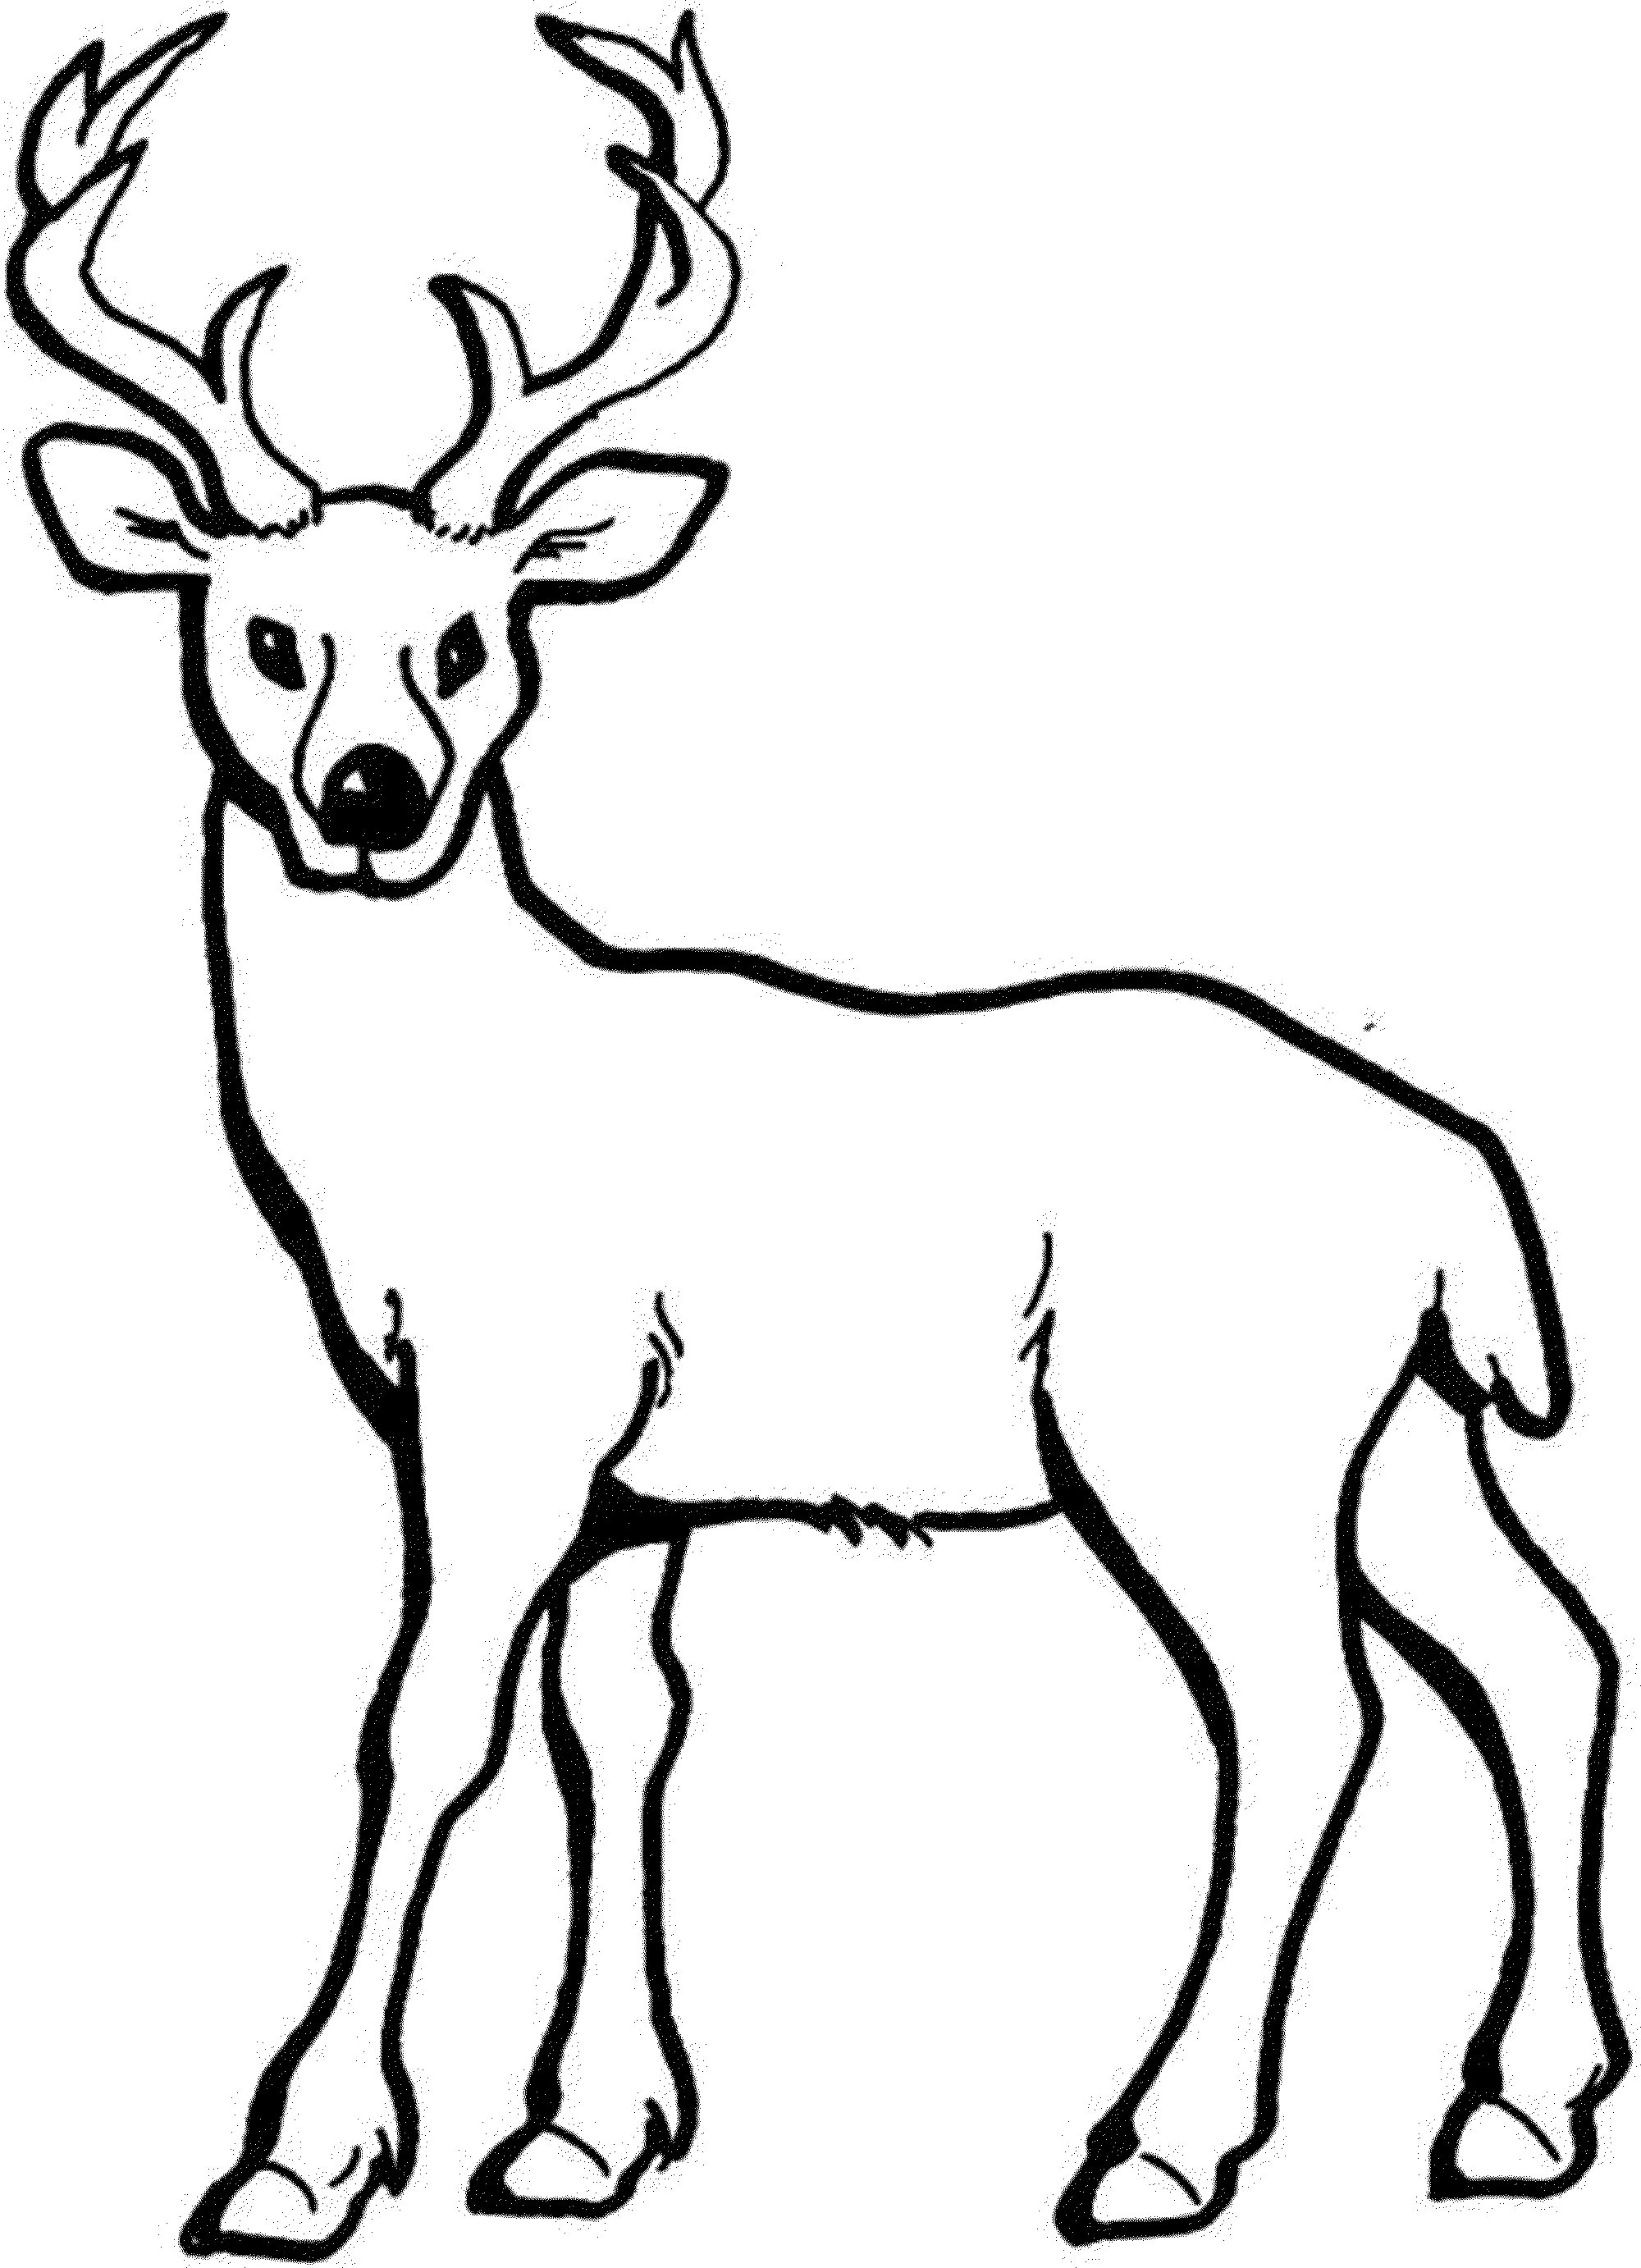 coloring-pages-of-deer | Deer coloring pages, Animal coloring ...